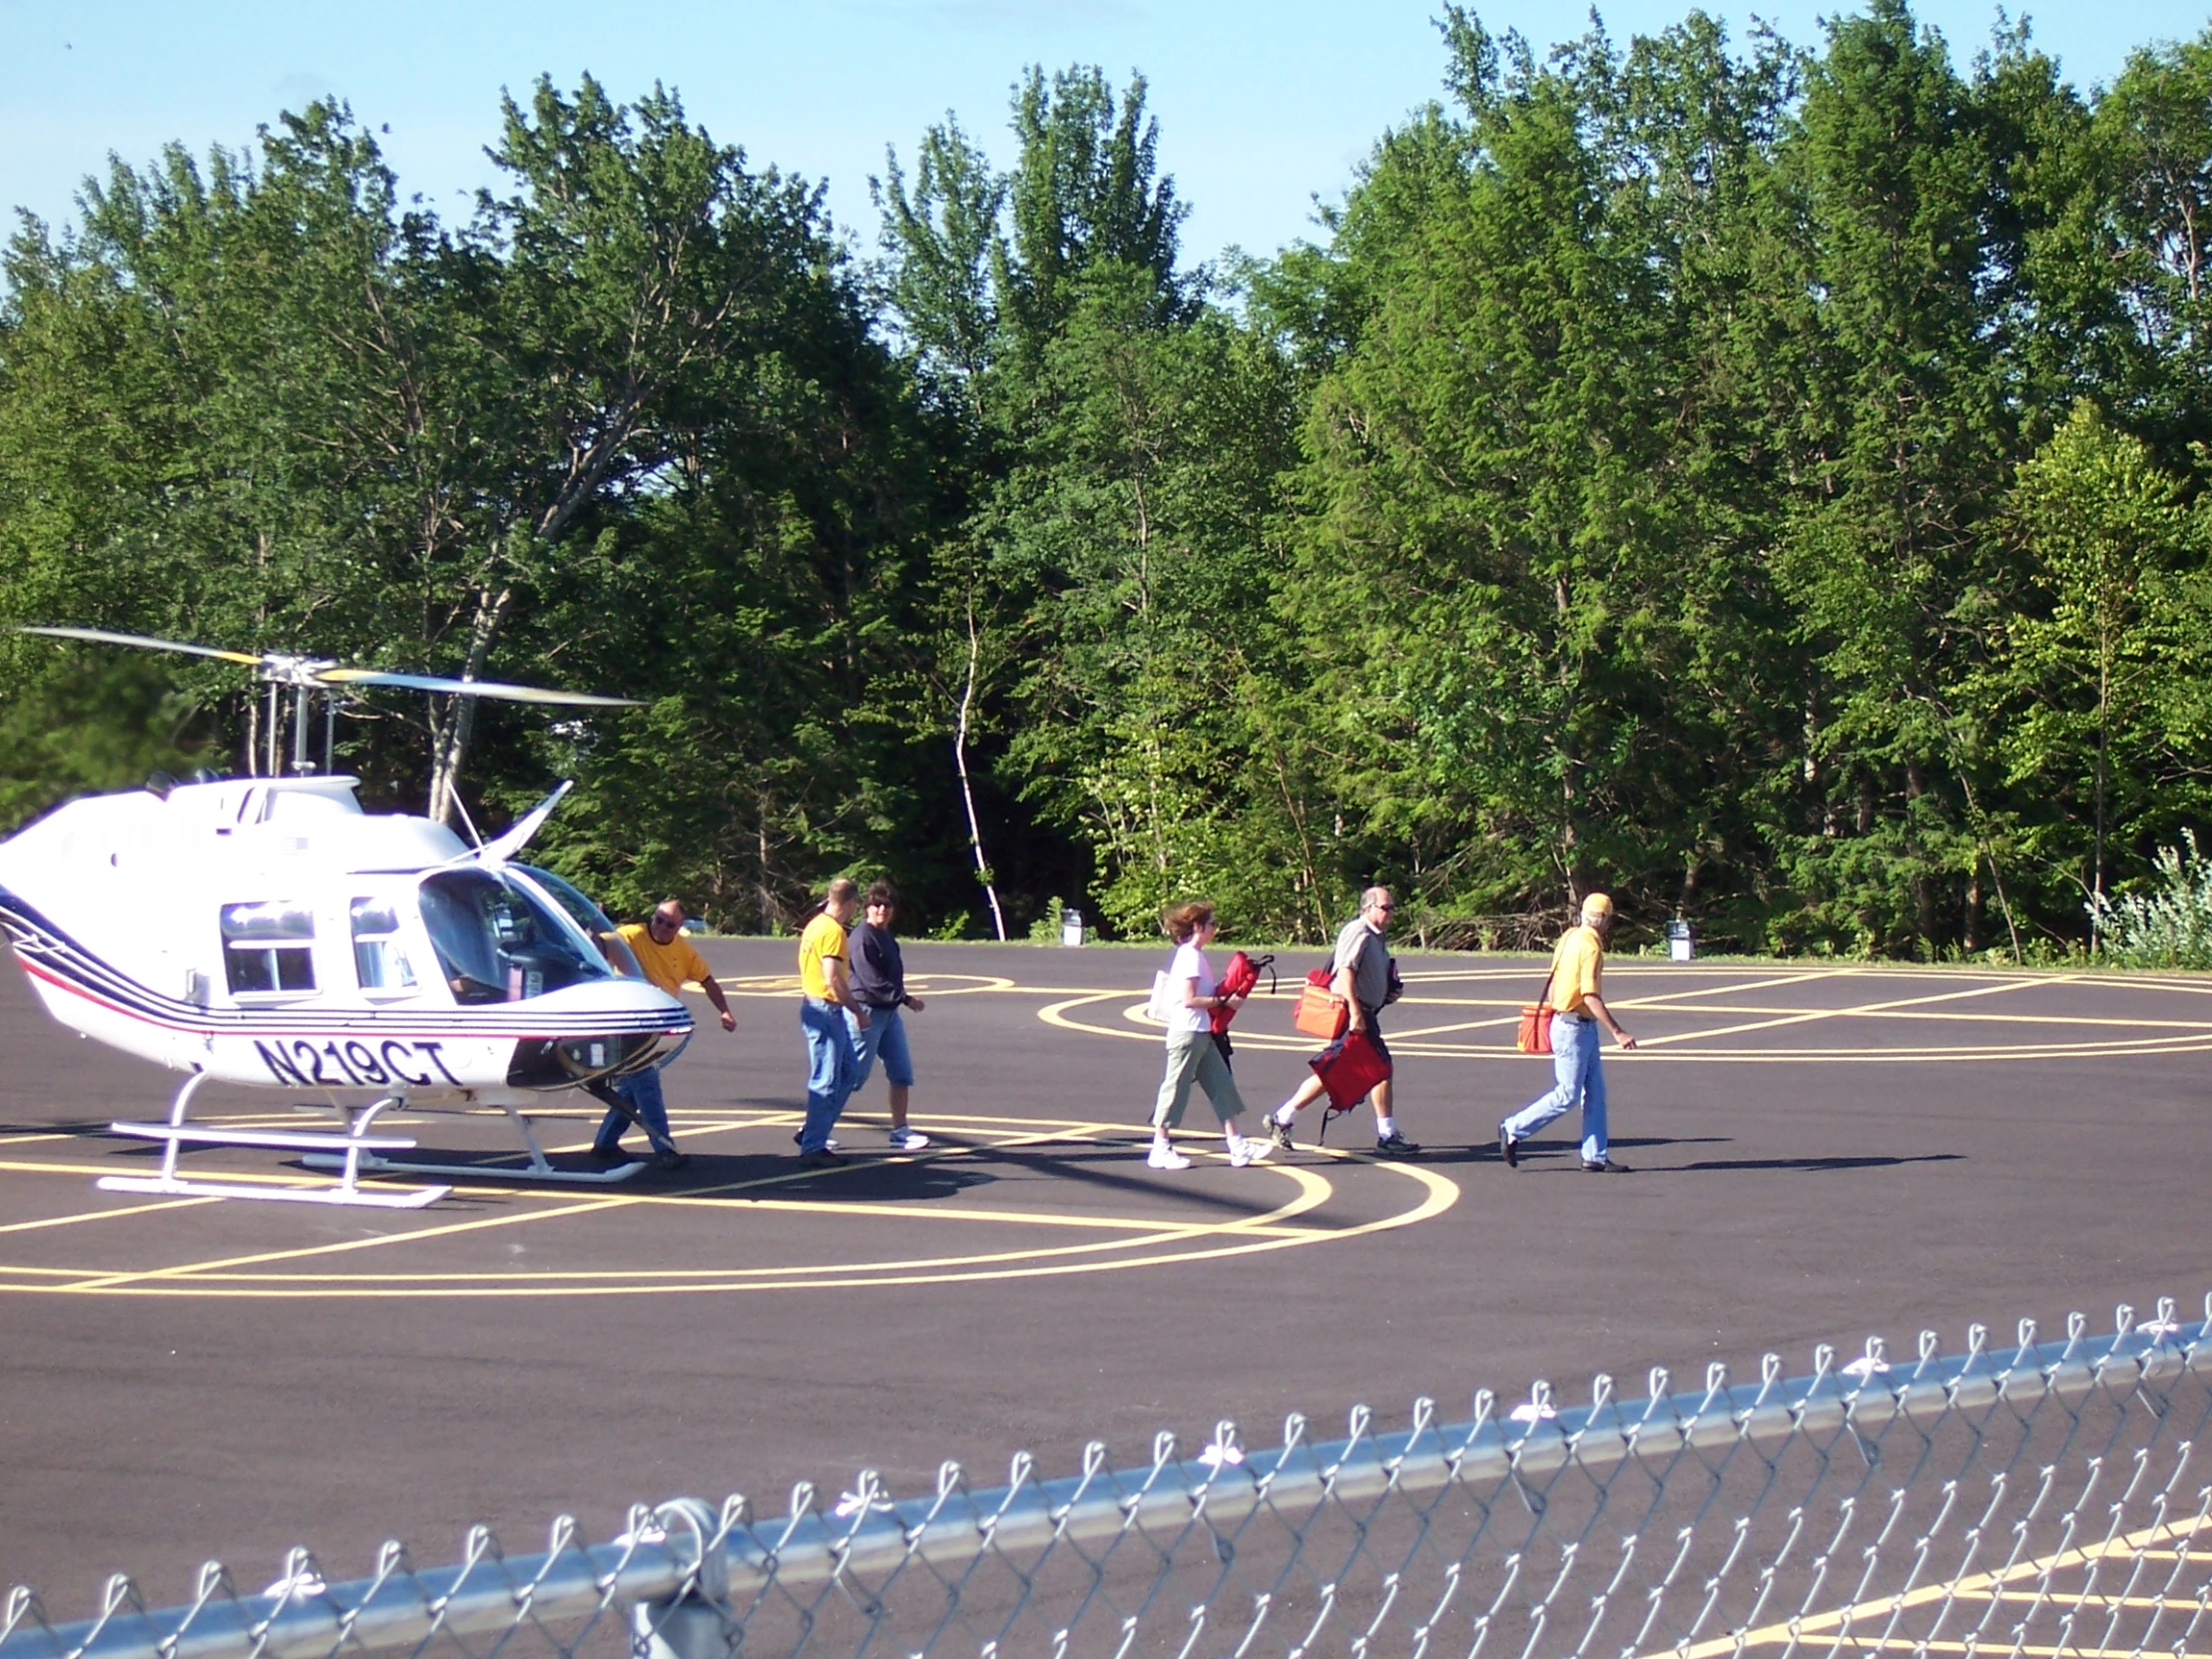 a helicopter with people walking by it on the pavement